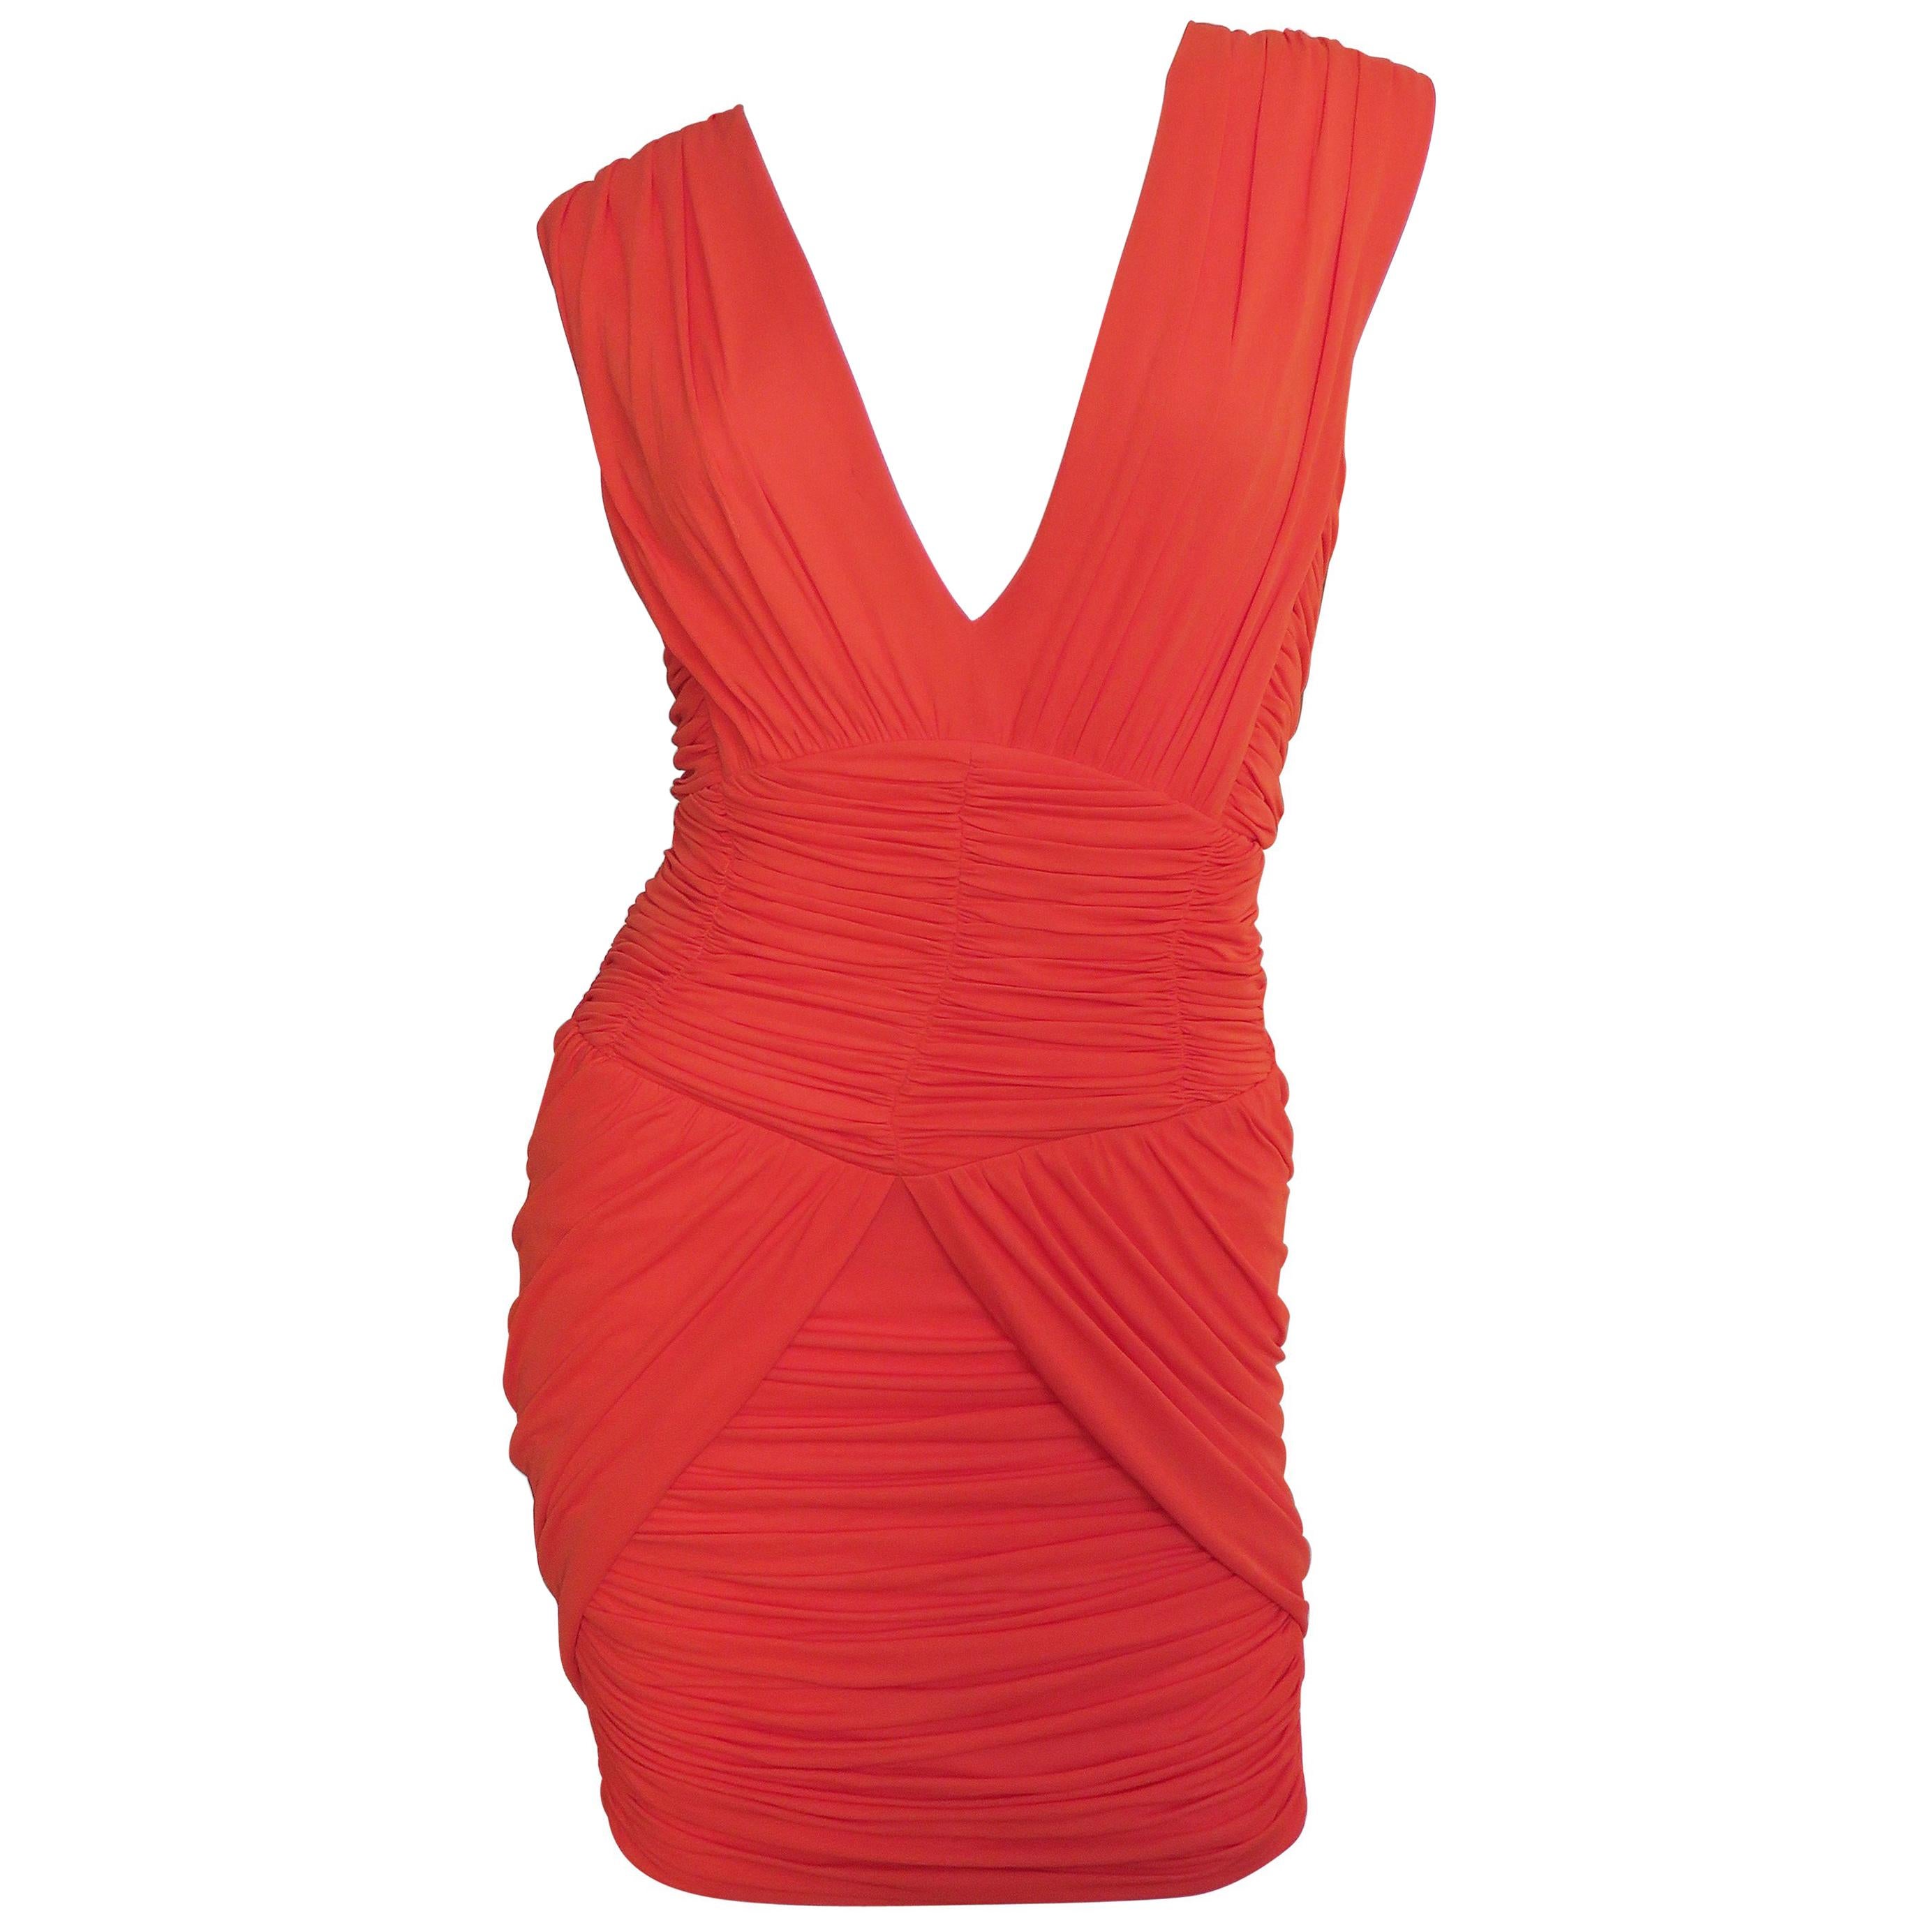 Runway Silk Ruched Dress For Sale at